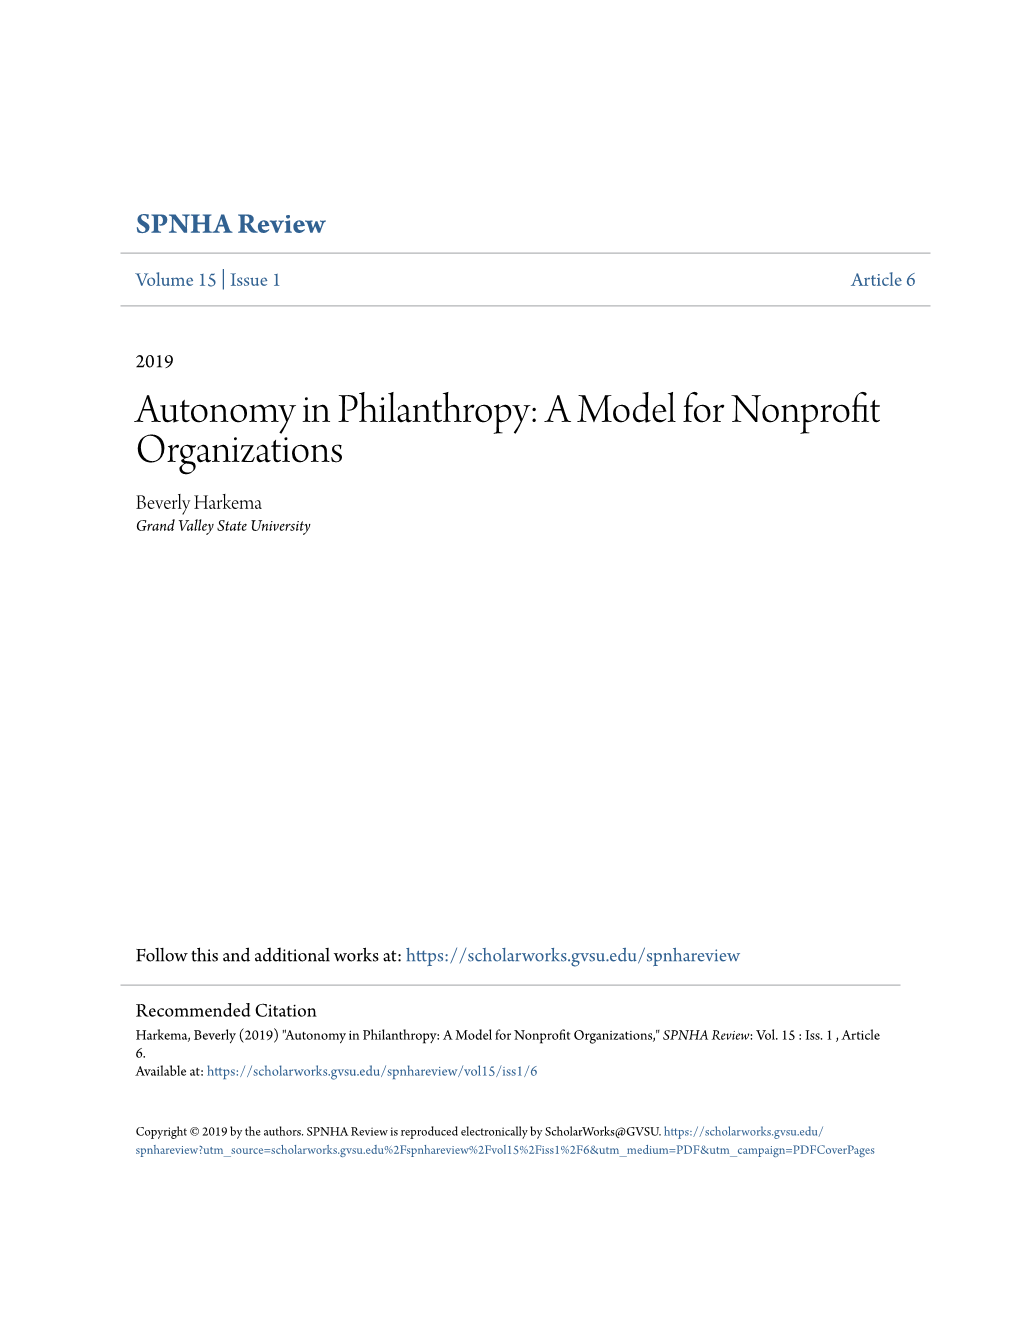 Autonomy in Philanthropy: a Model for Nonprofit Organizations Beverly Harkema Grand Valley State University